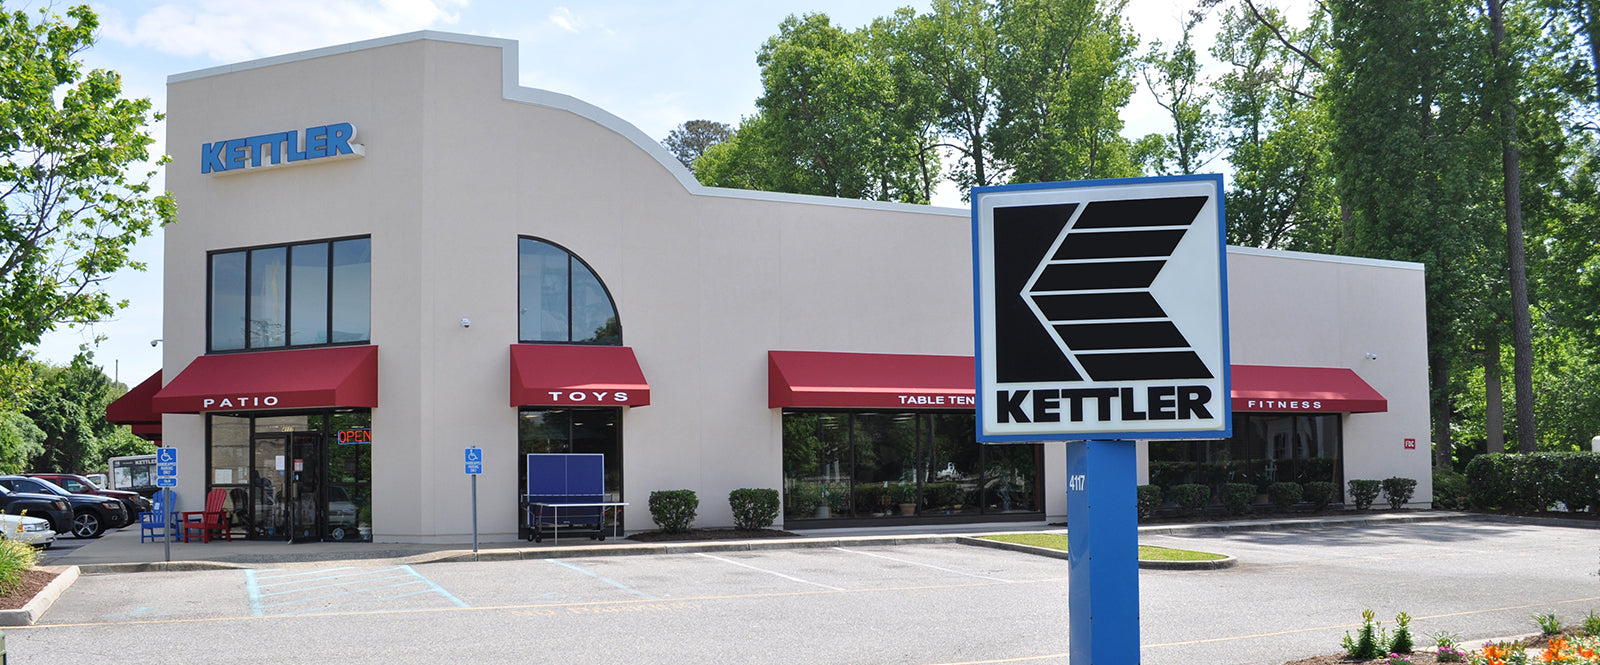 Outside image of the centrally located KETTLER Showroom in Virginia Beach across from the public library.